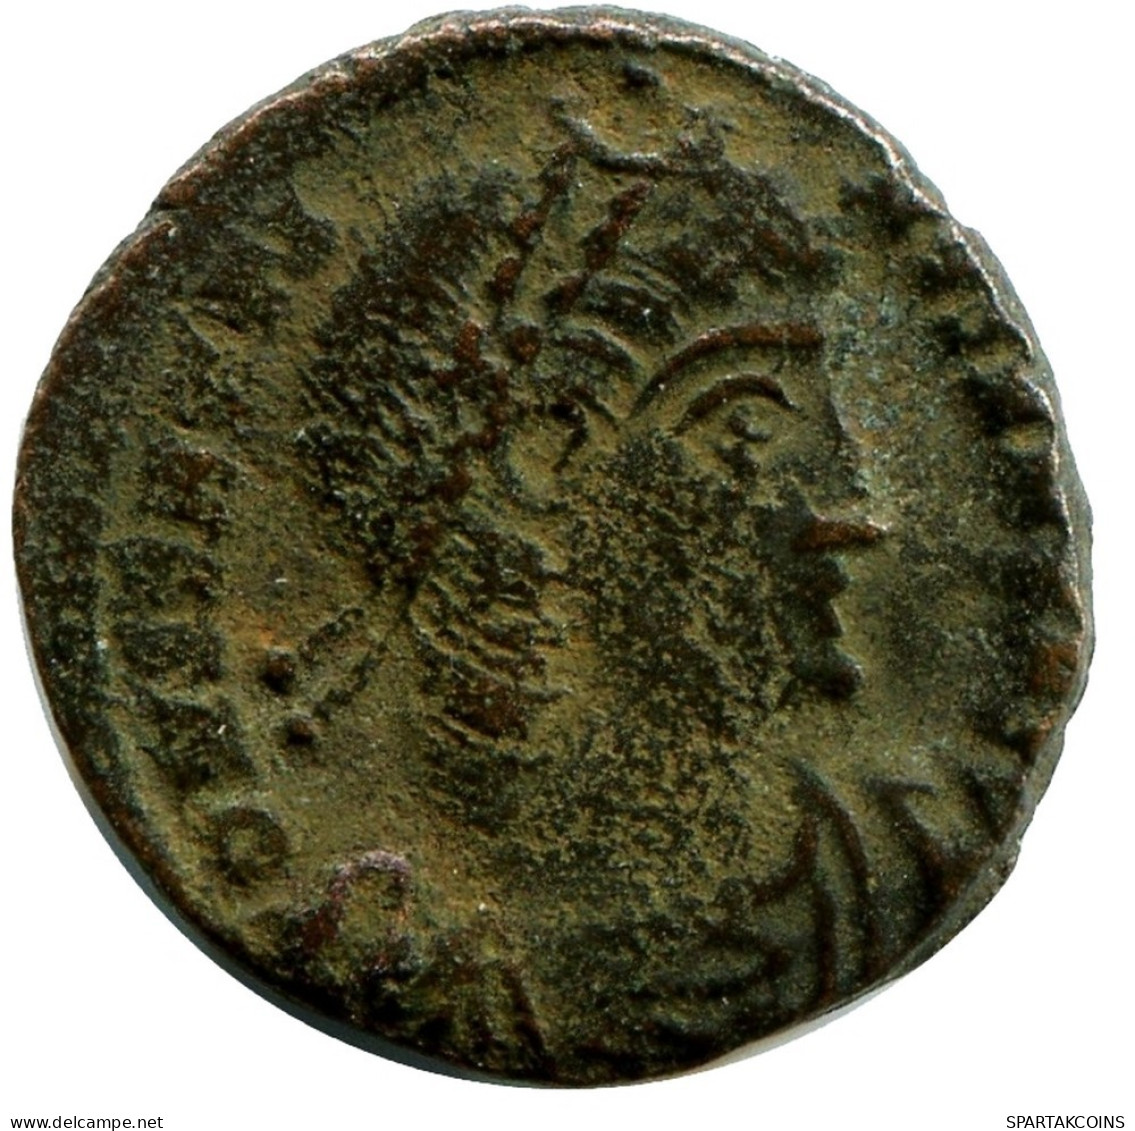 CONSTANTINE I MINTED IN CYZICUS FROM THE ROYAL ONTARIO MUSEUM #ANC11030.14.E.A - The Christian Empire (307 AD To 363 AD)